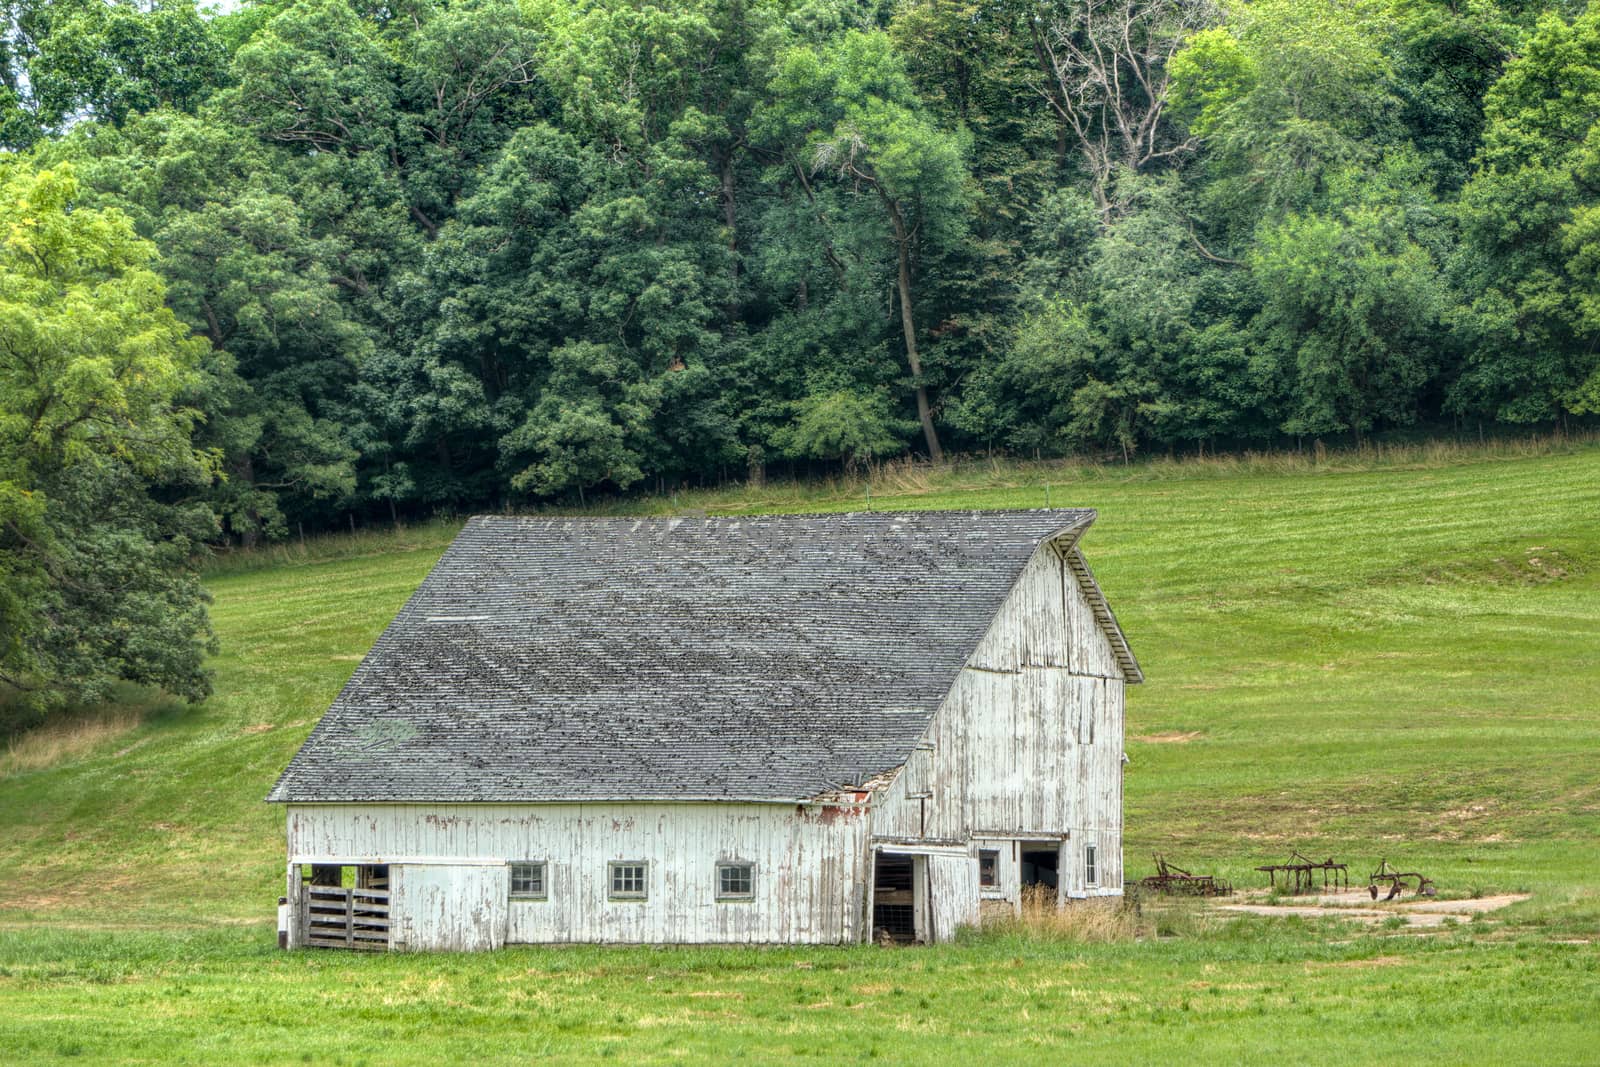 Weathered Barn in the America Midwest by wolterk